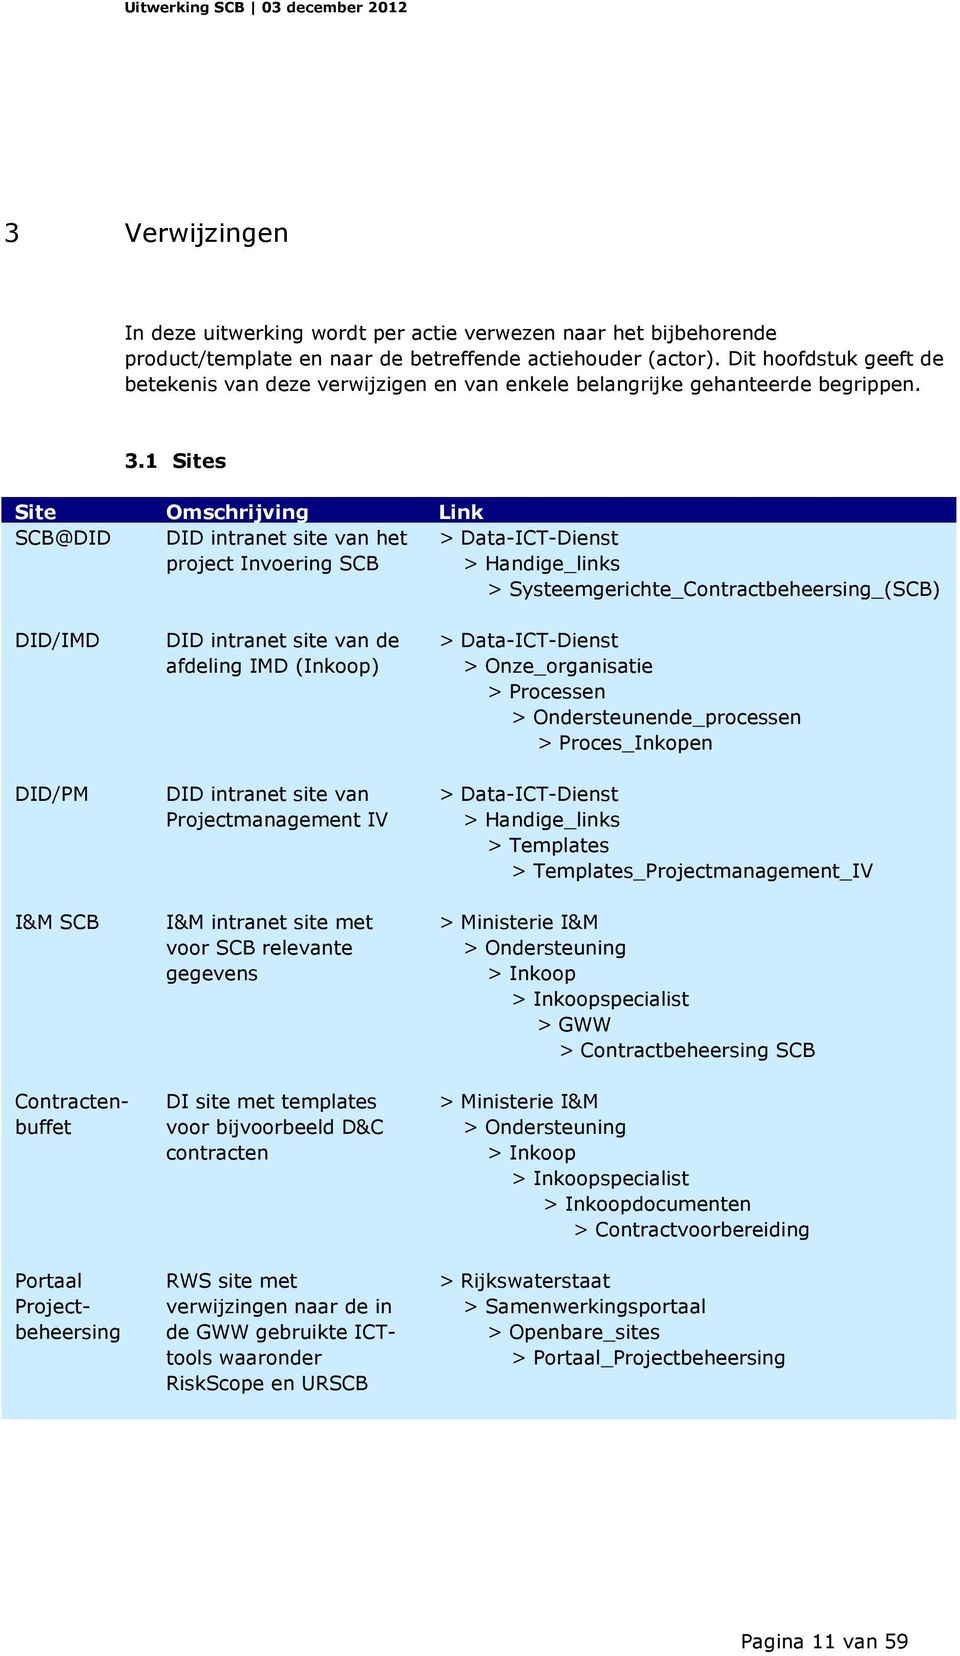 1 Sites Site Omschrijving Link SCB@DID DID intranet site van het project Invoering SCB > Data-ICT-Dienst > Handige_links > Systeemgerichte_Contractbeheersing_(SCB) DID/IMD DID/PM I&M SCB